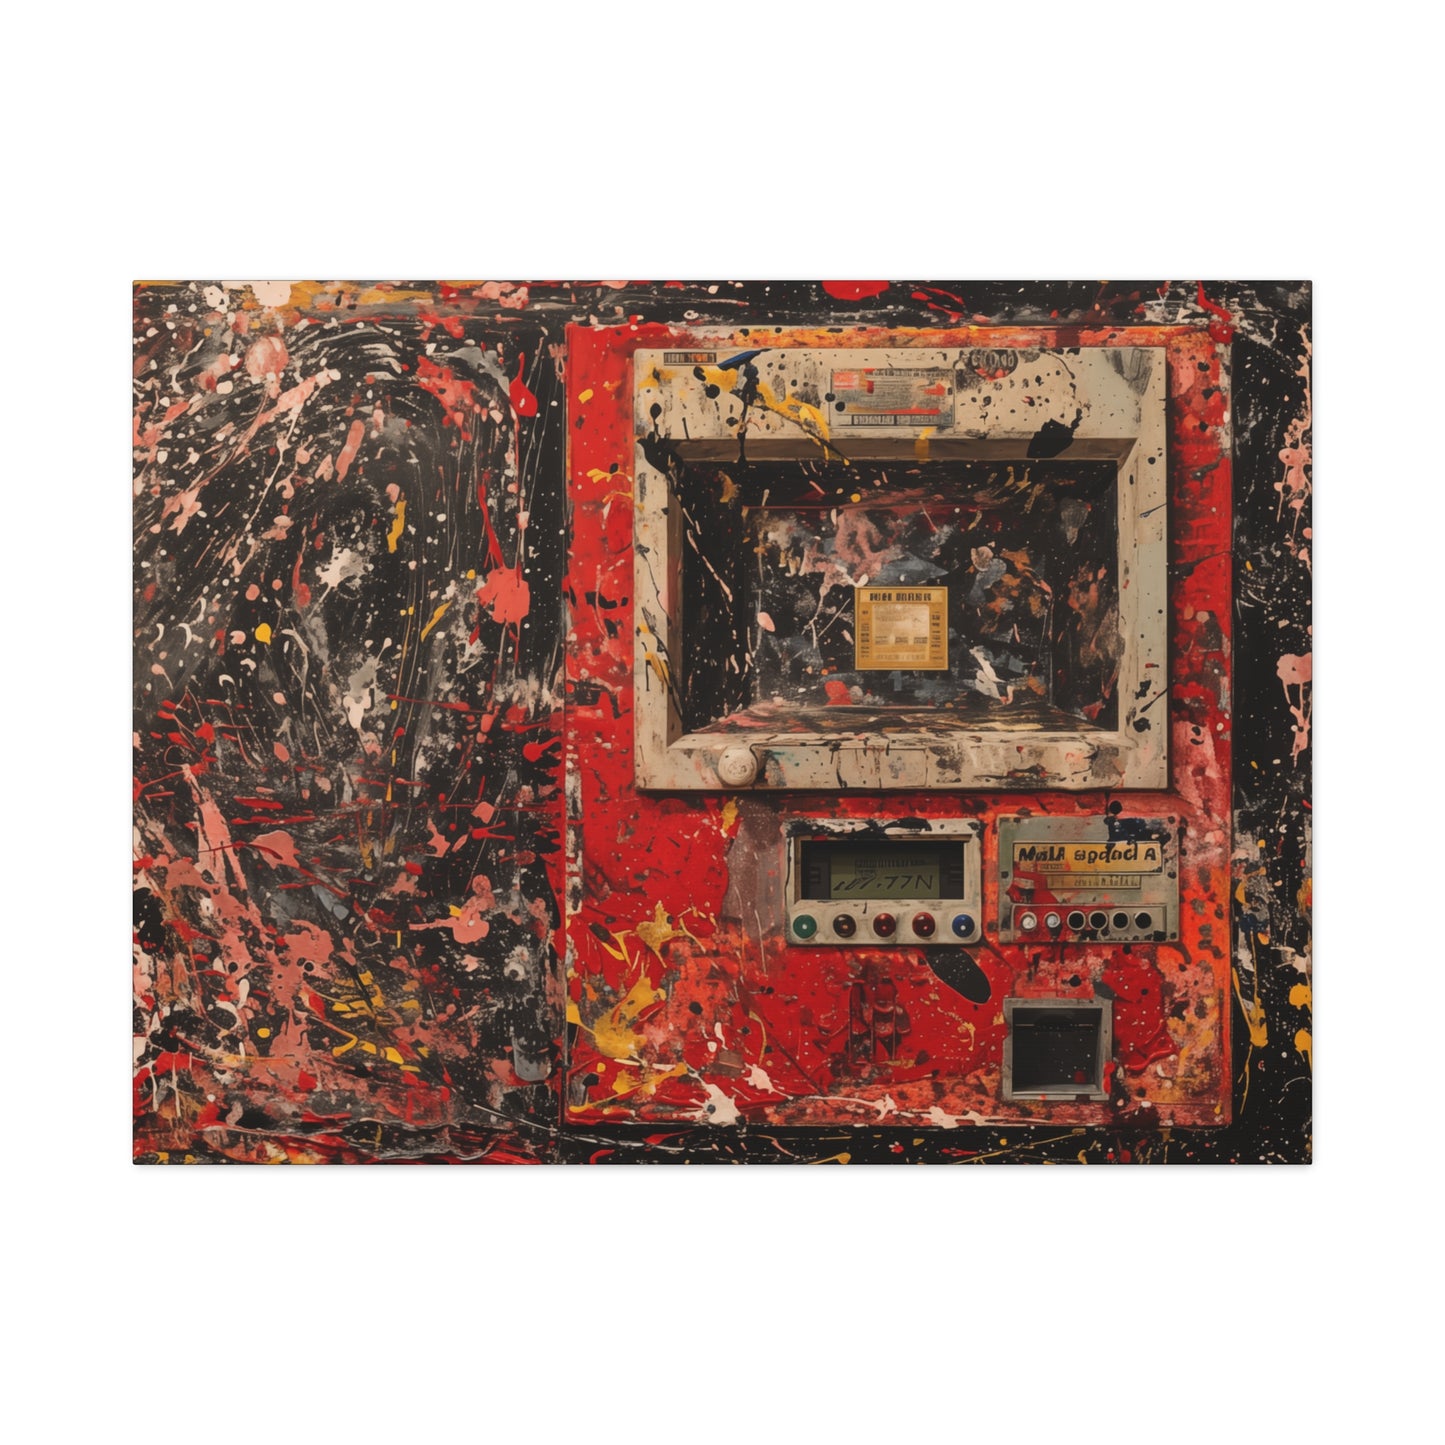 Pollock paints and ATM - the canvas